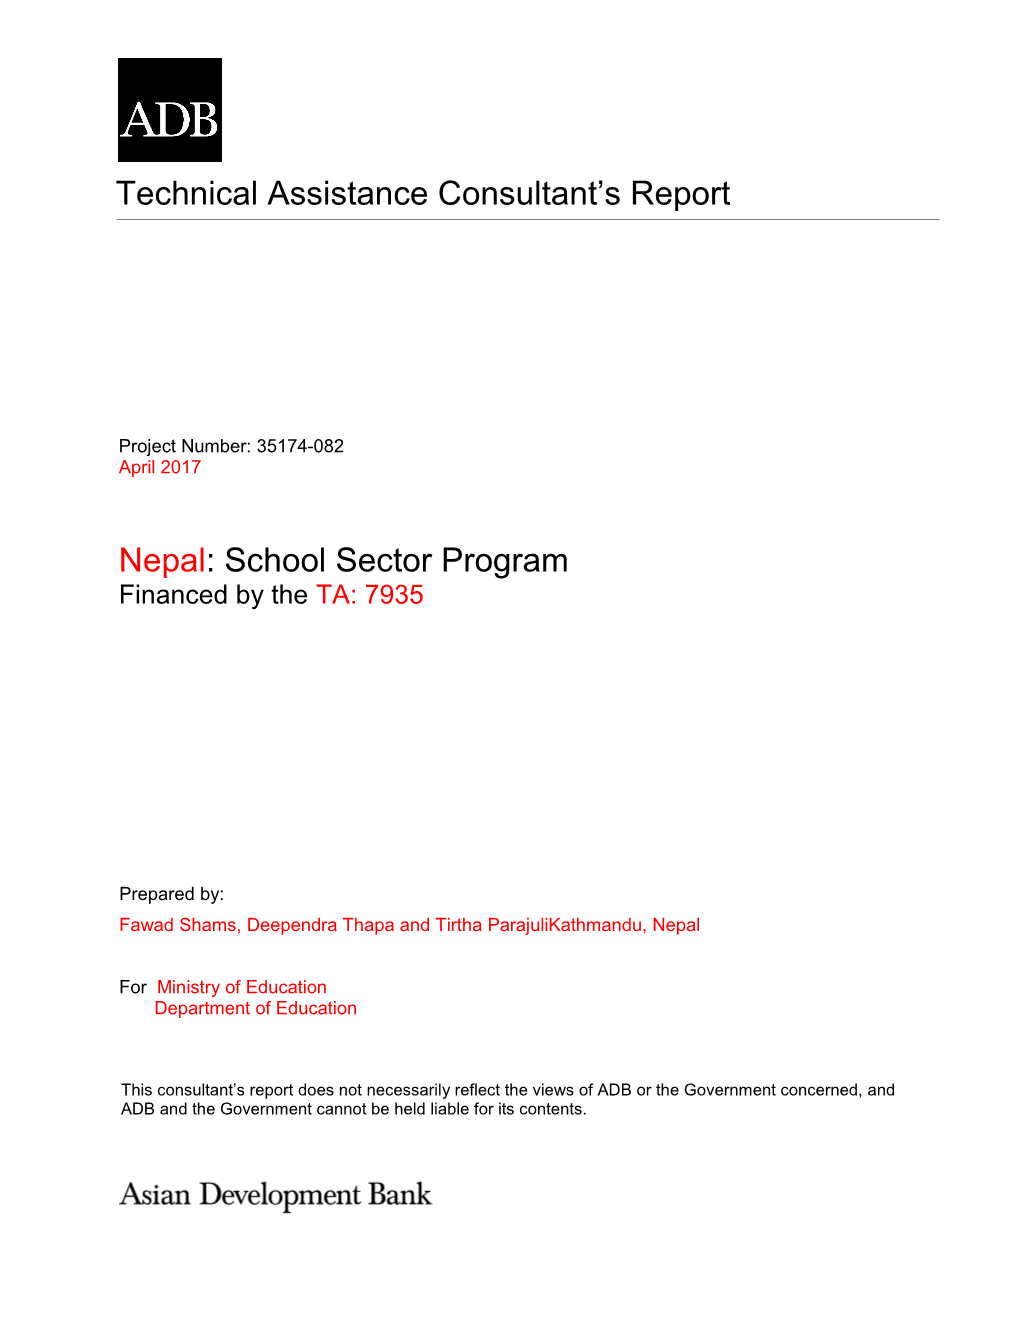 Technical Assistance Consultant's Report Nepal: School Sector Program